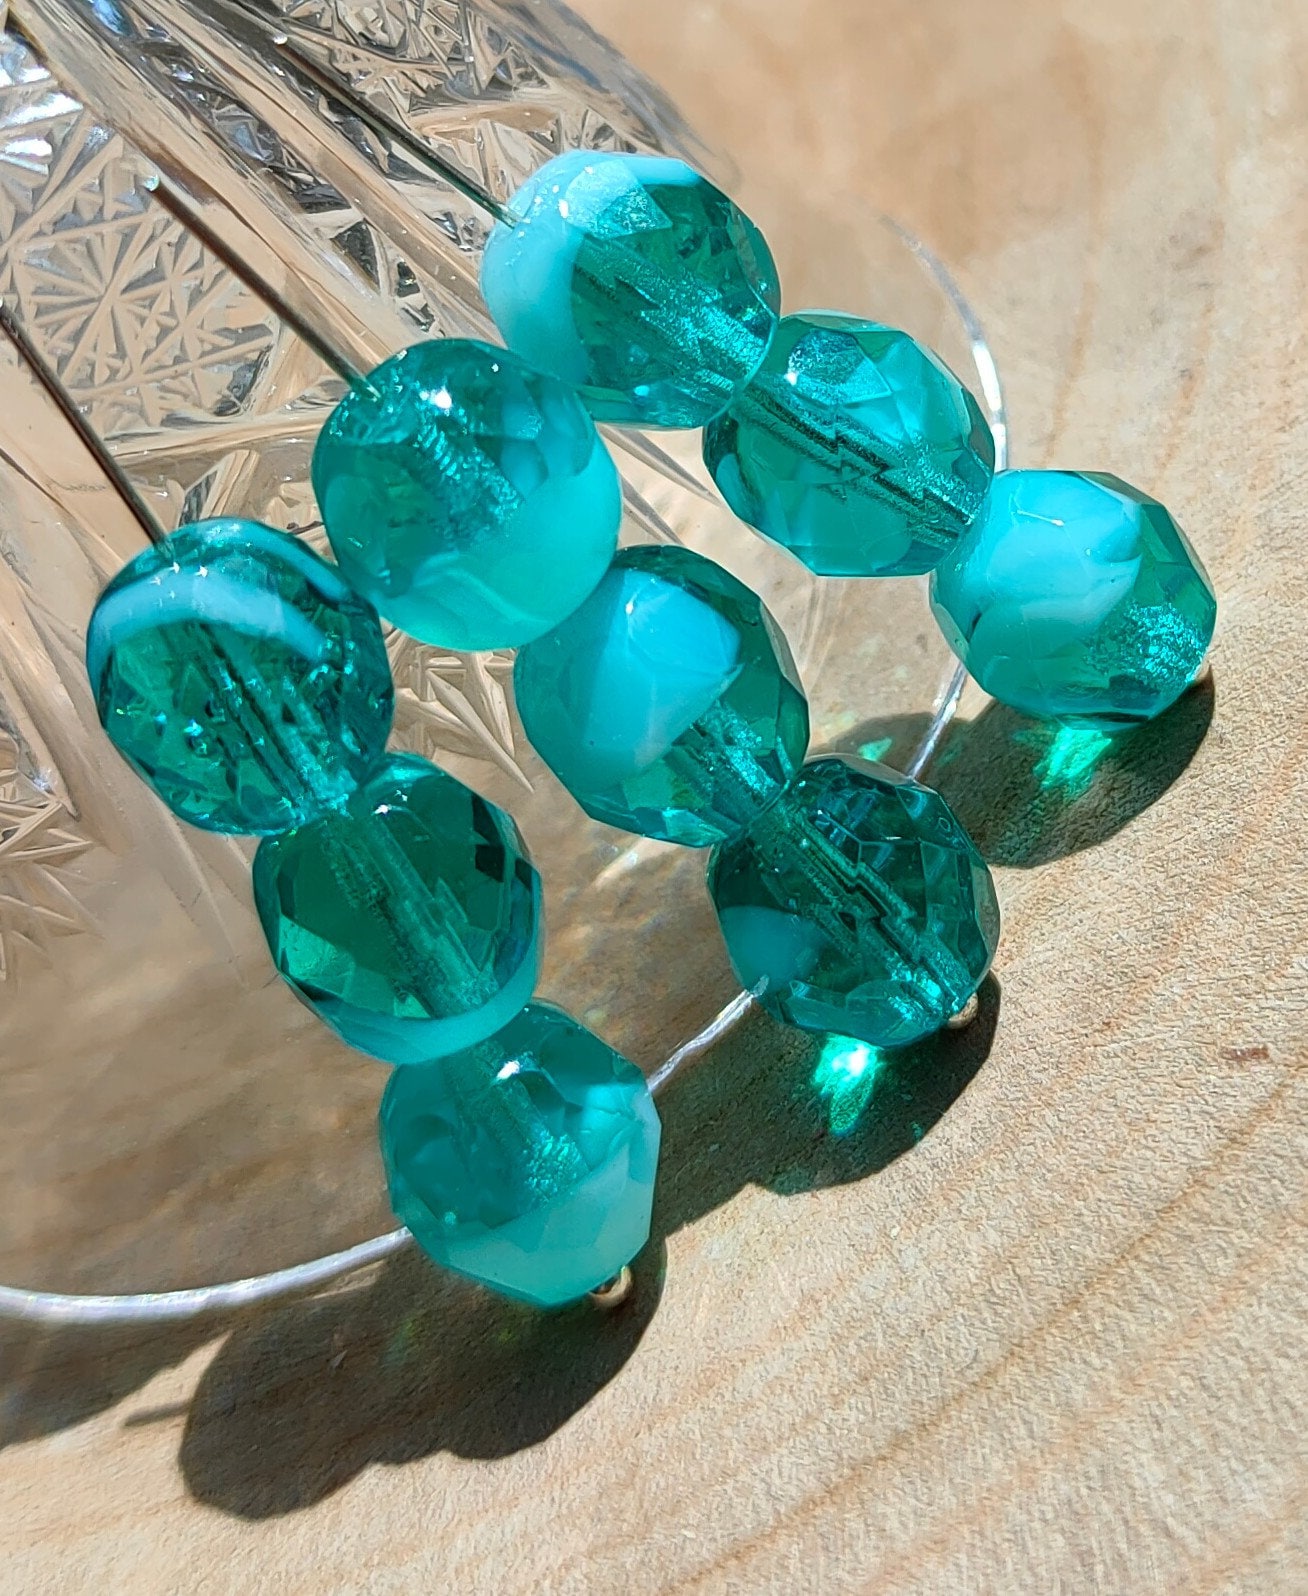 12 Packs: 11 ct. (132 total) Turquoise Ceramic Heart Beads, 14mm